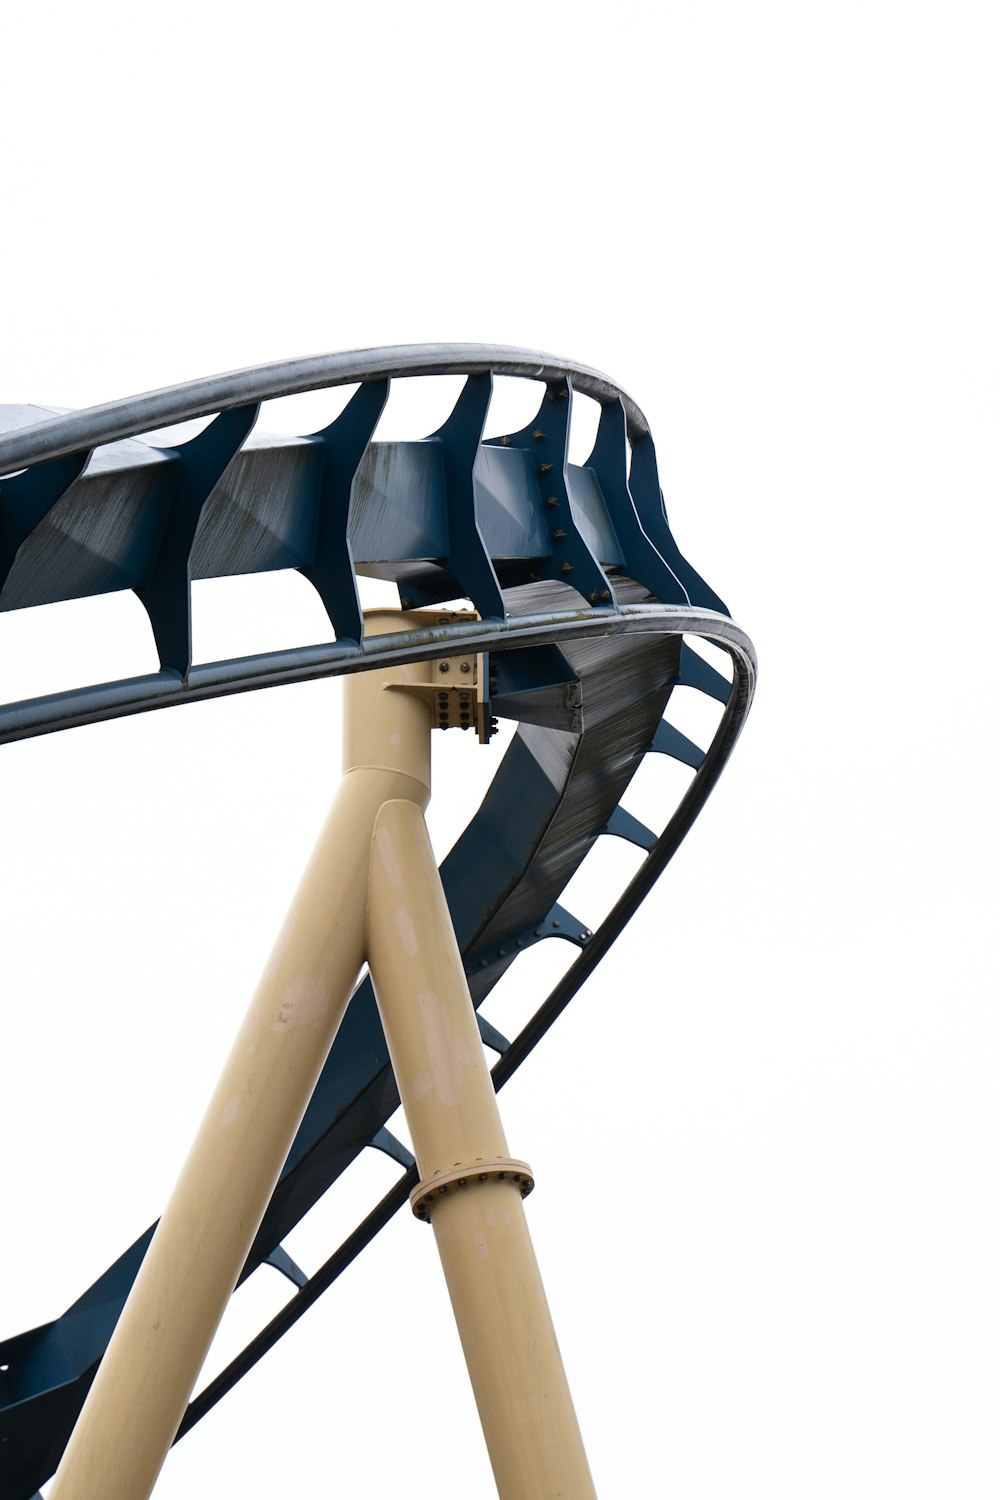 a close up of a roller coaster on a white background